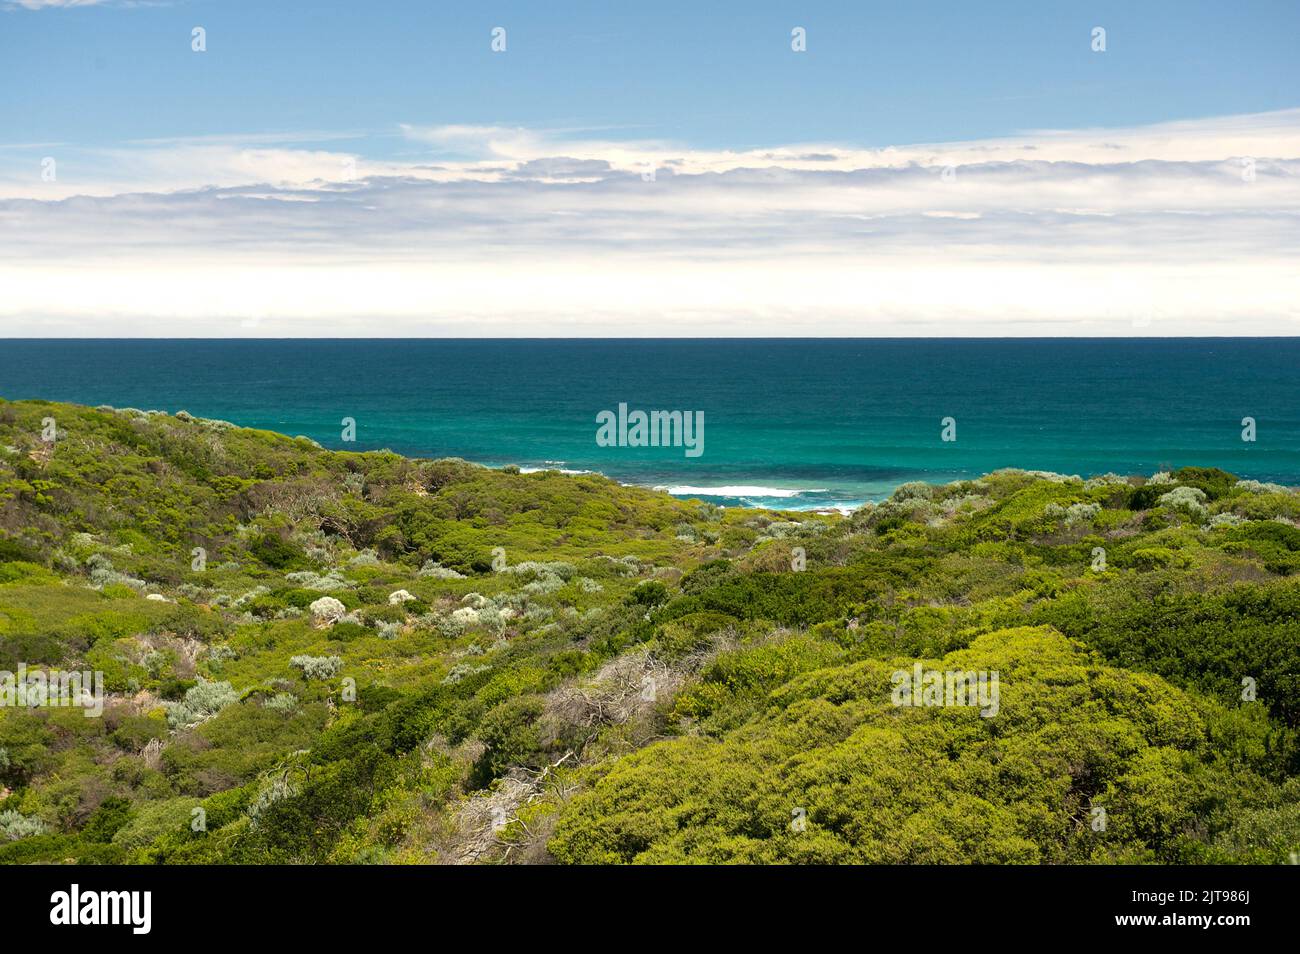 Point Nepean, Victoria, Australia, on a sunny day. The shallows had a lovely turquoise colour, which contrasted with the green of the coastal scrub. Stock Photo